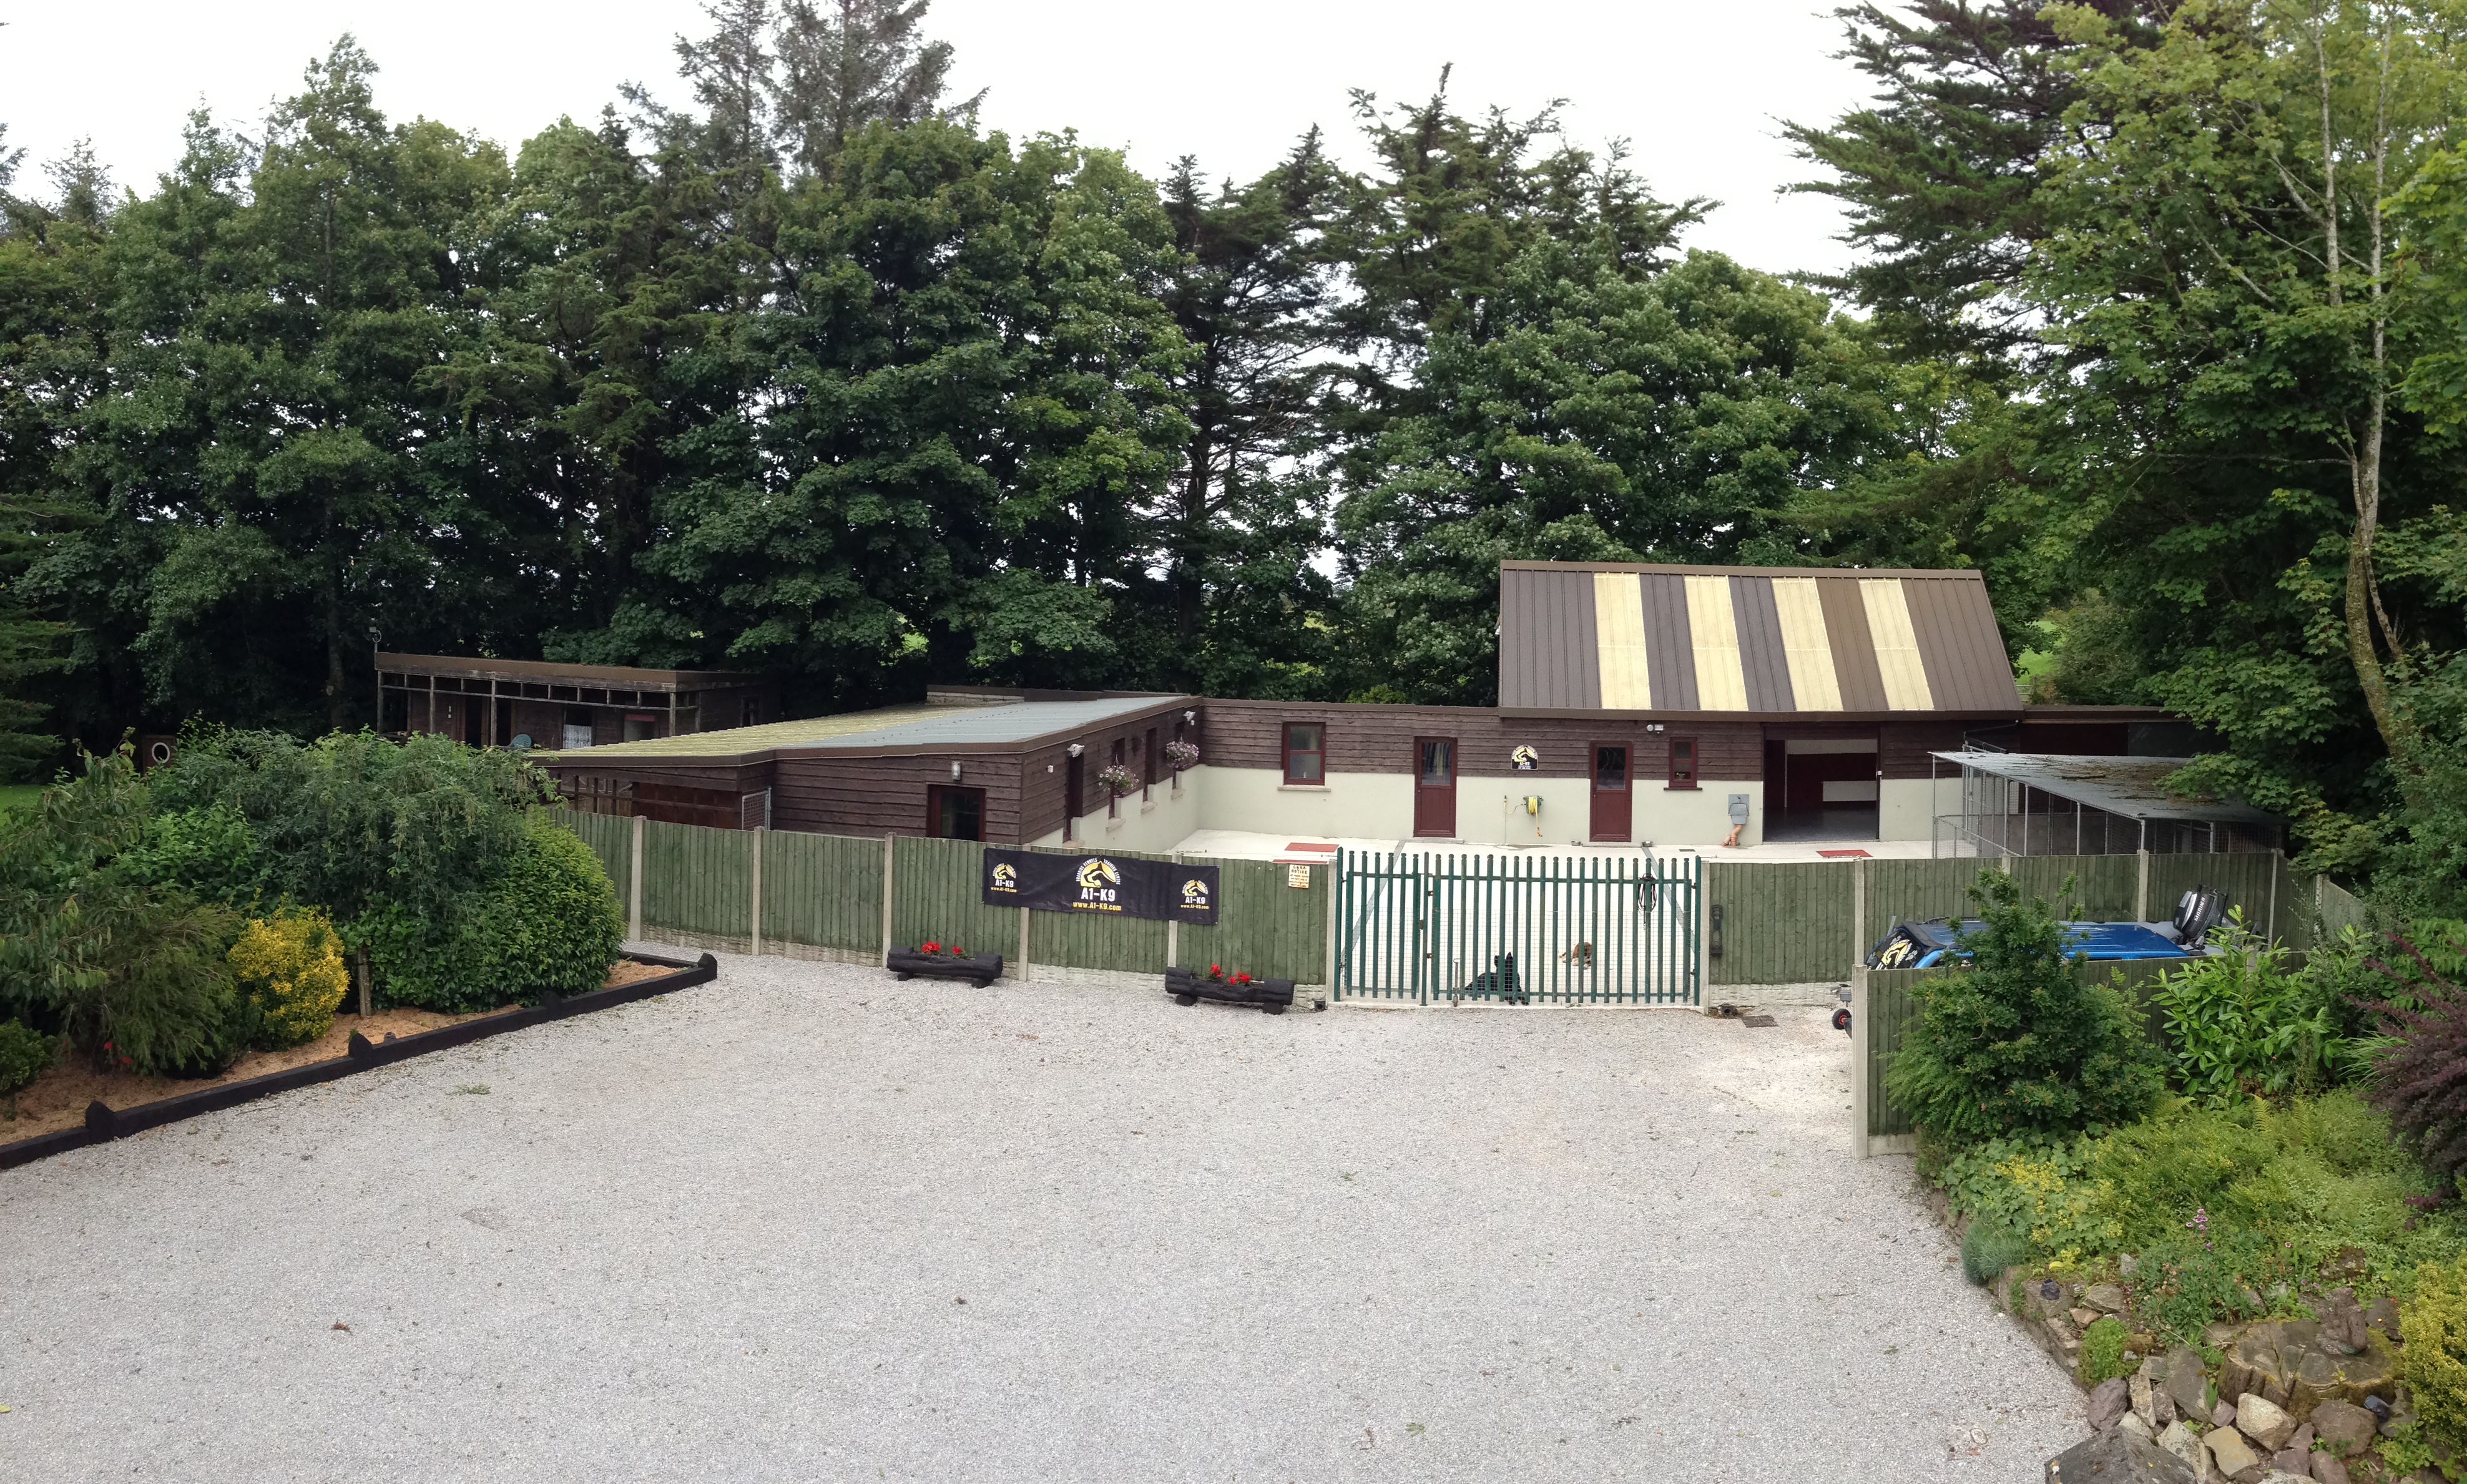 A1K9 Dog Boarding Kennels and Training Centre in Cork